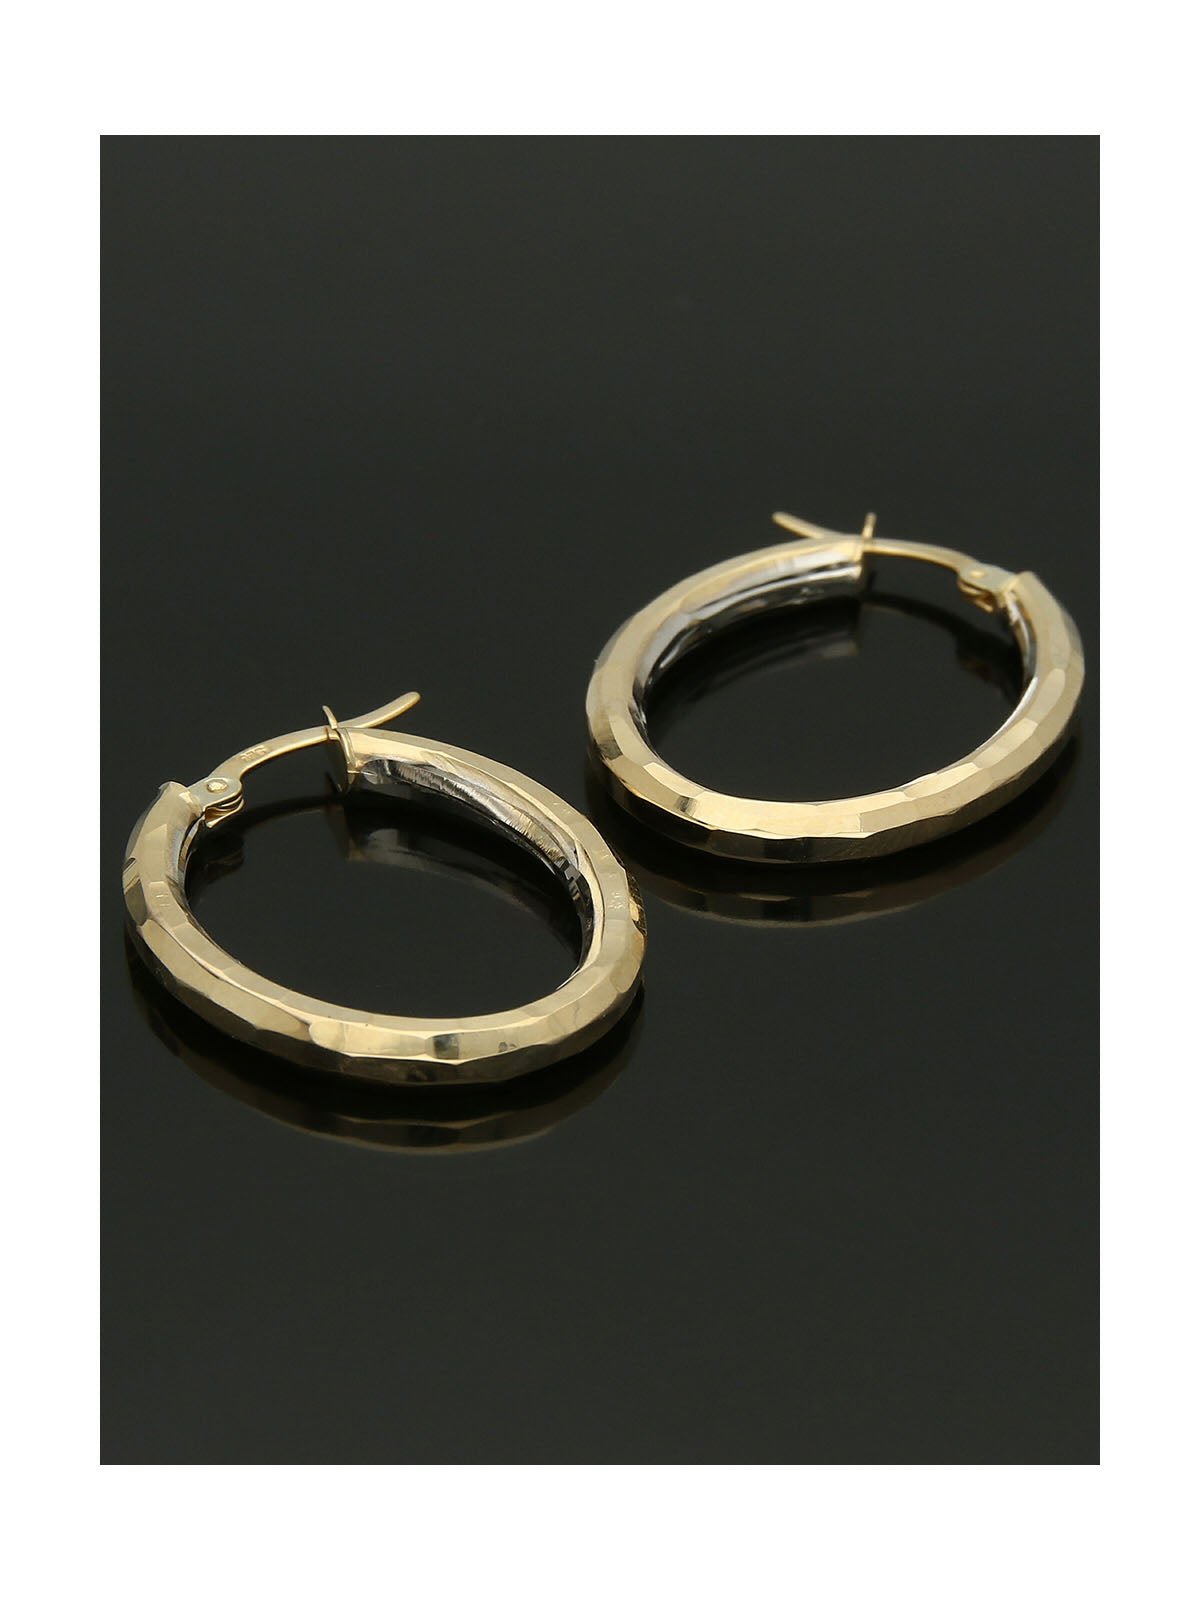 Patterned Oval Hoop Earrings in 9ct Yellow Gold